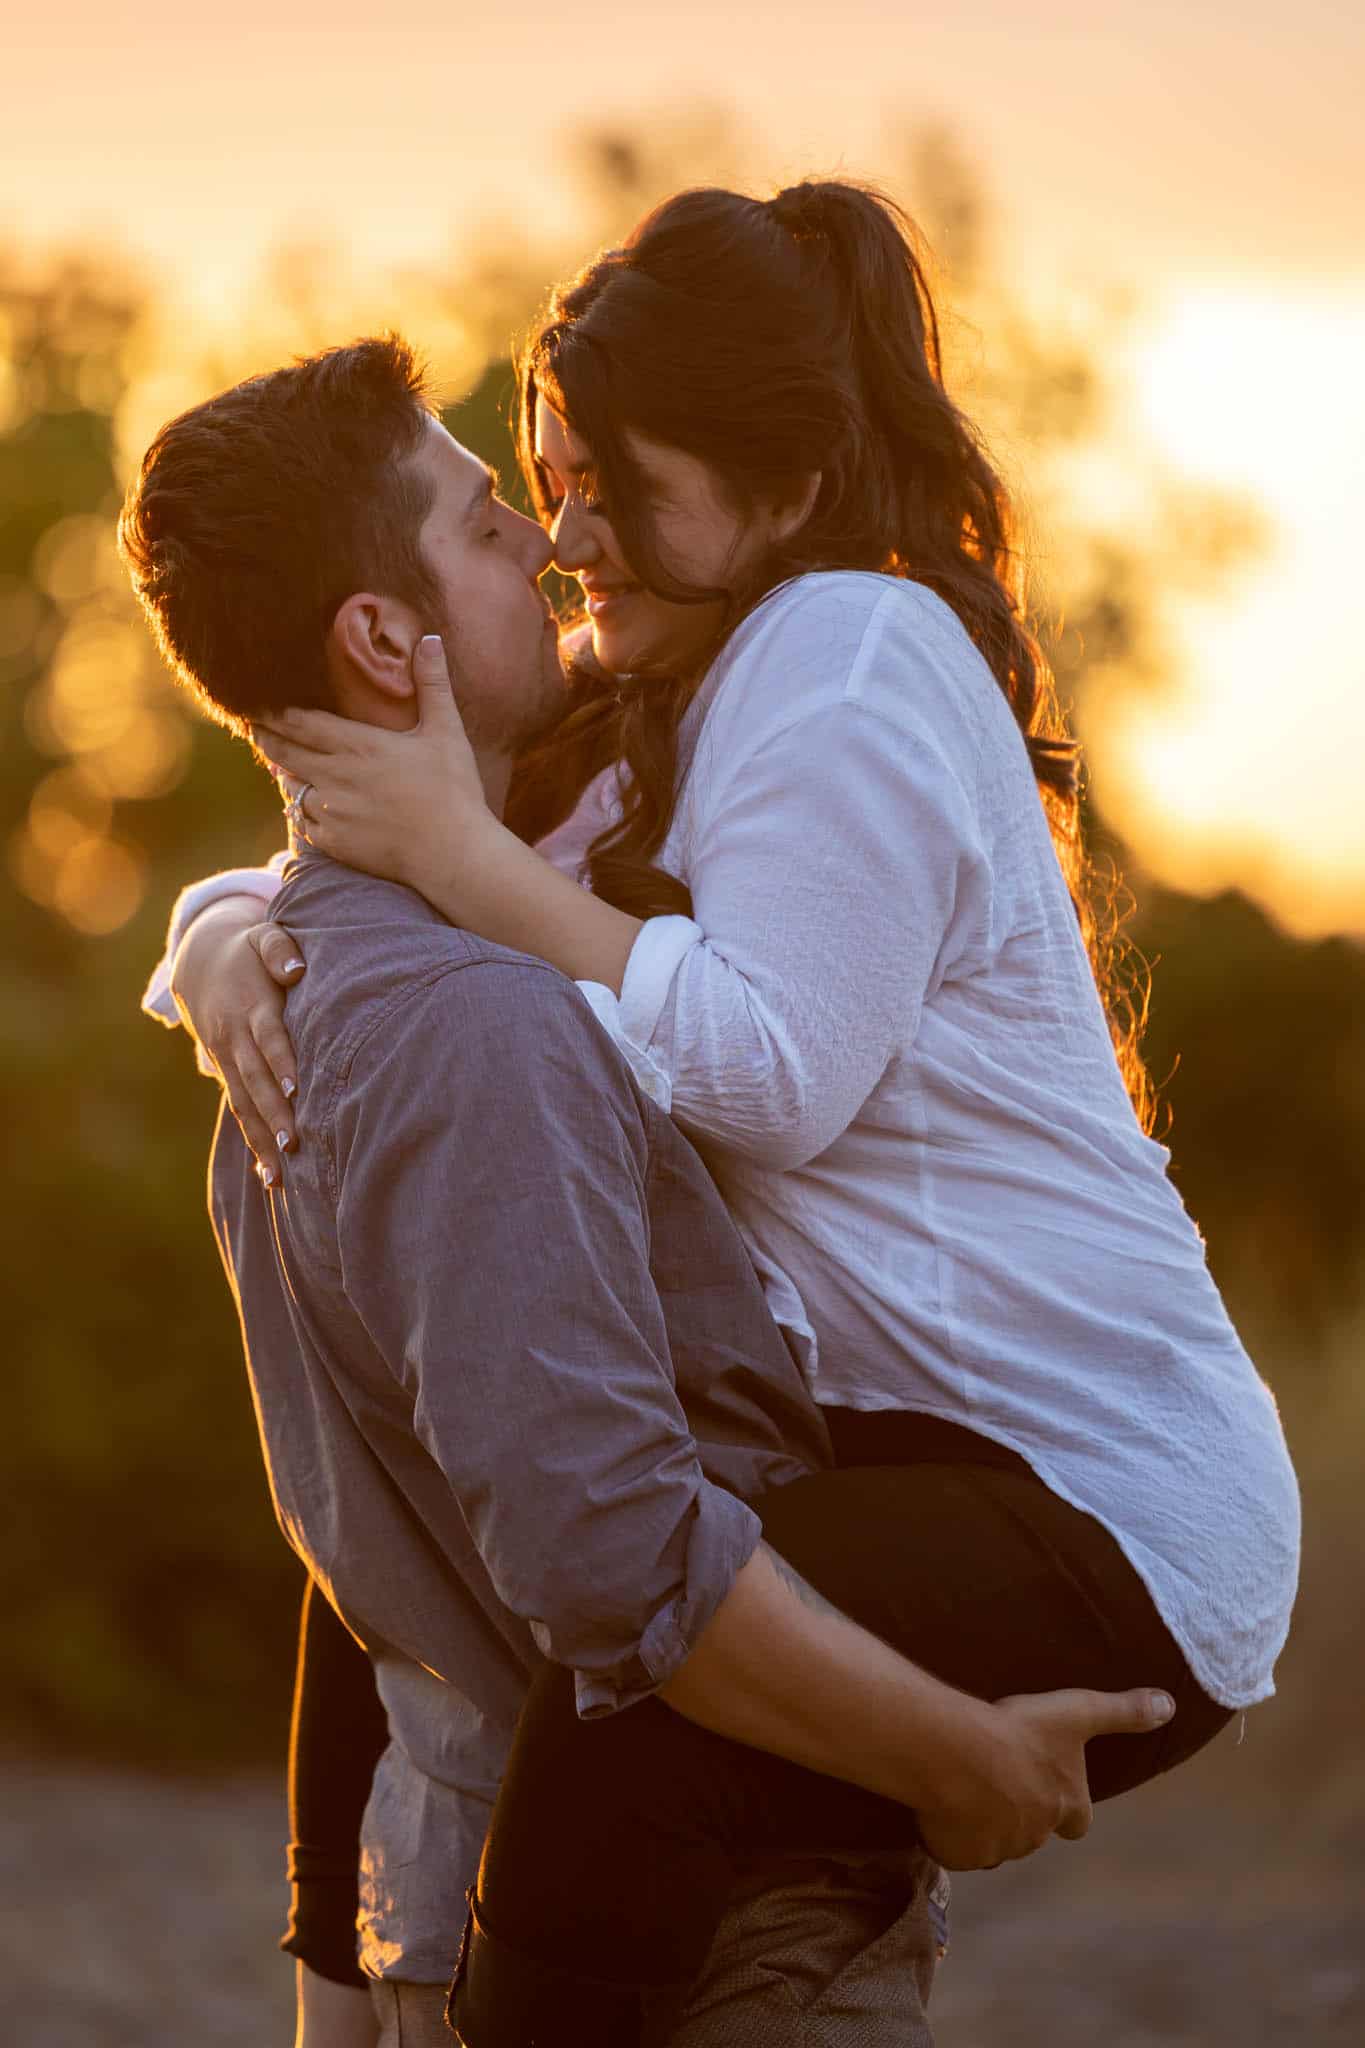 woman jumps up as her fiance holds her as she holds his face and they lean into kiss each other